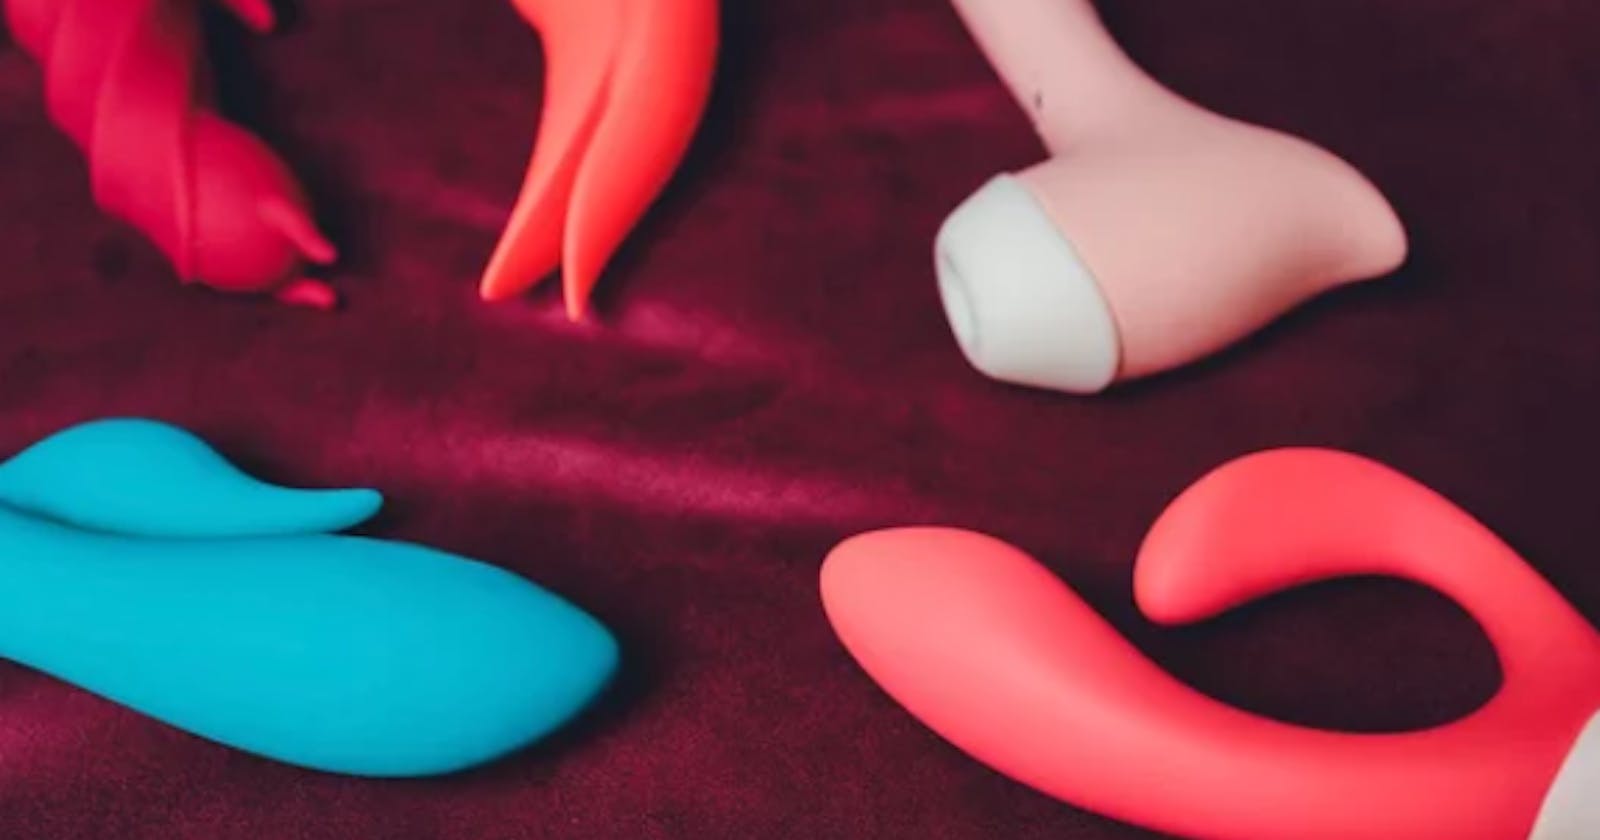 Some Fascinating Reasons Why You Should Use Sex Toys